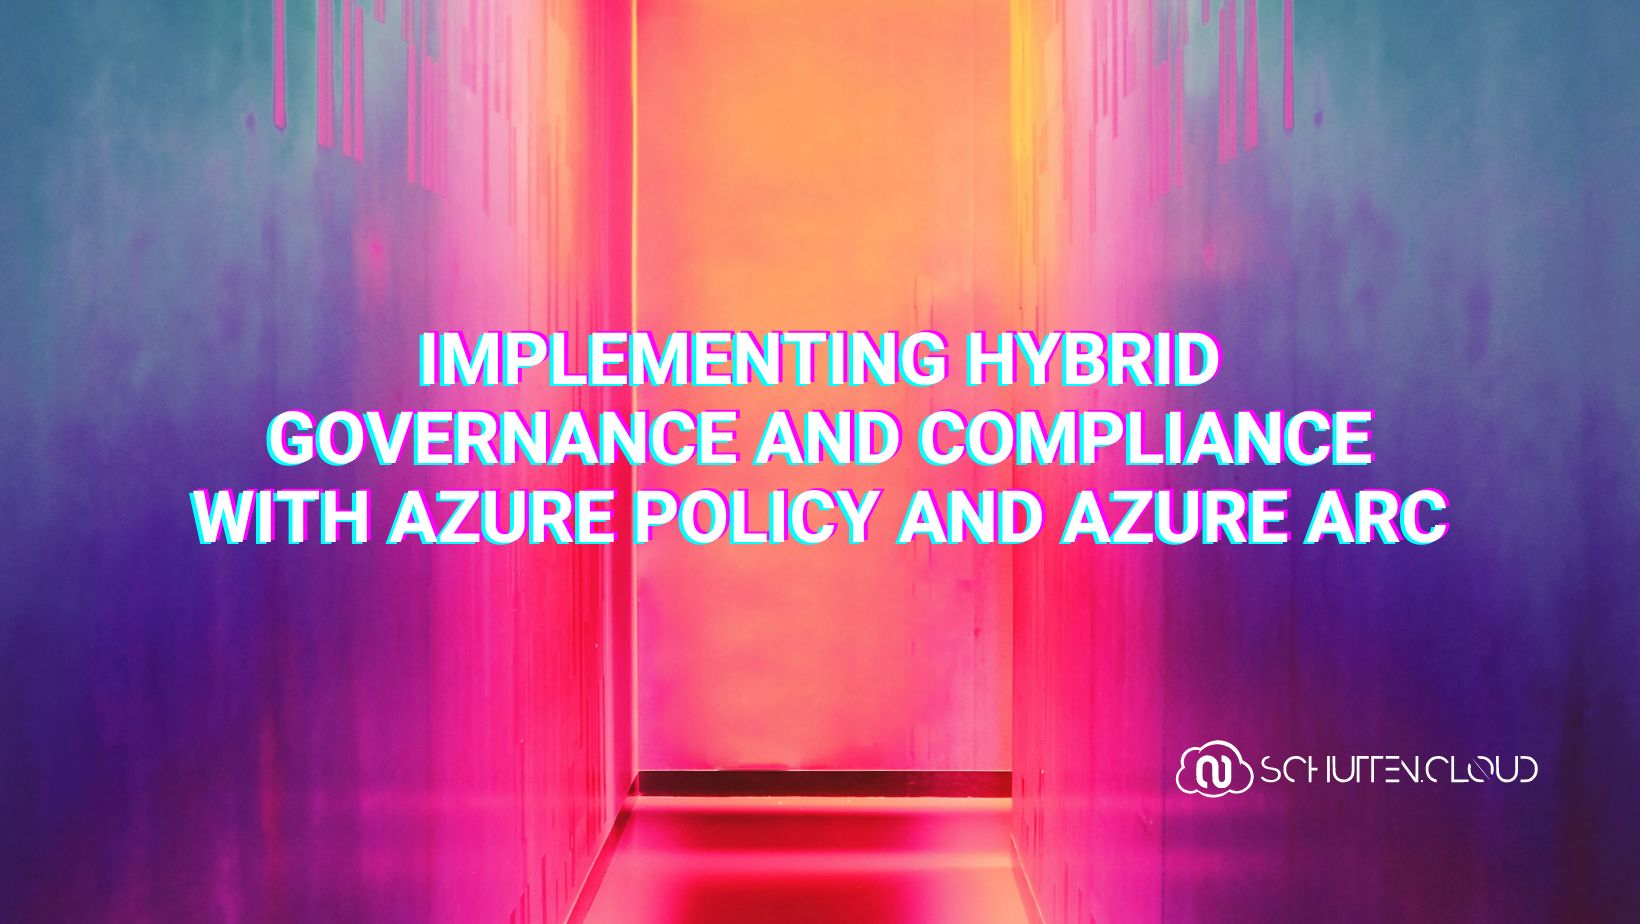 Implementing Hybrid Governance and Compliance with Azure Policy and Azure Arc